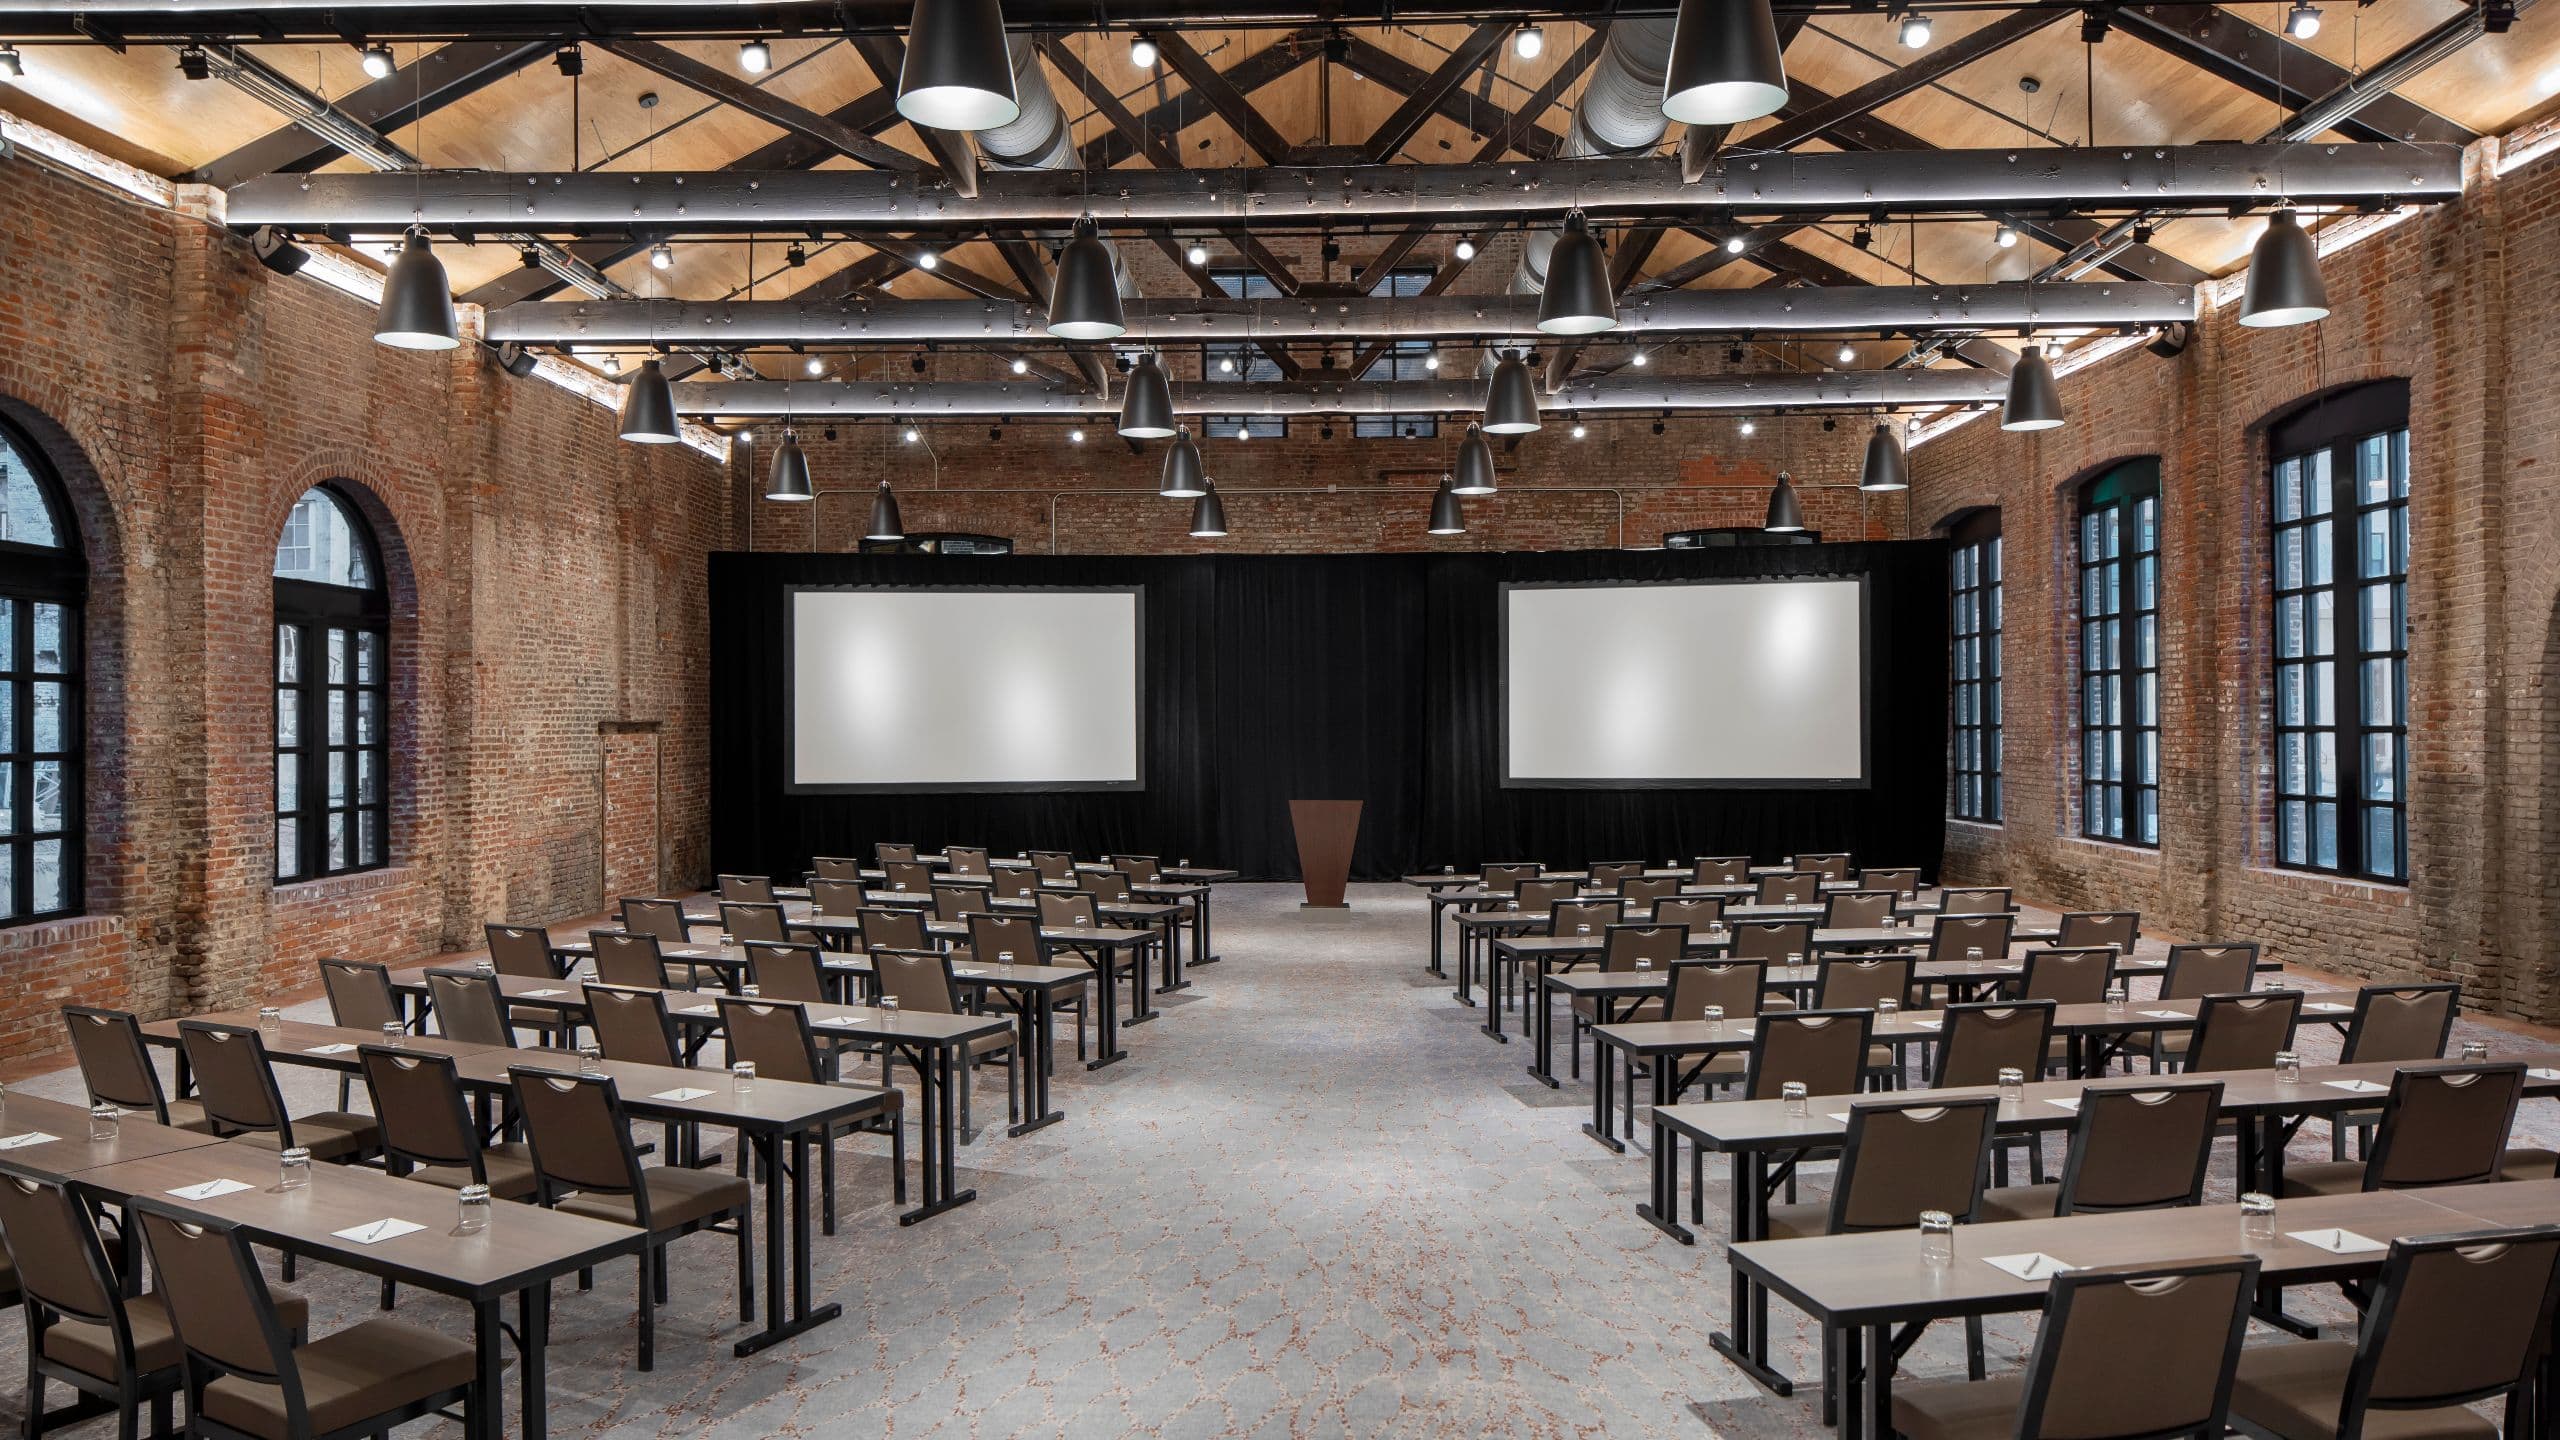 Foundry Ballroom with classroom set-up including podium and projector screens